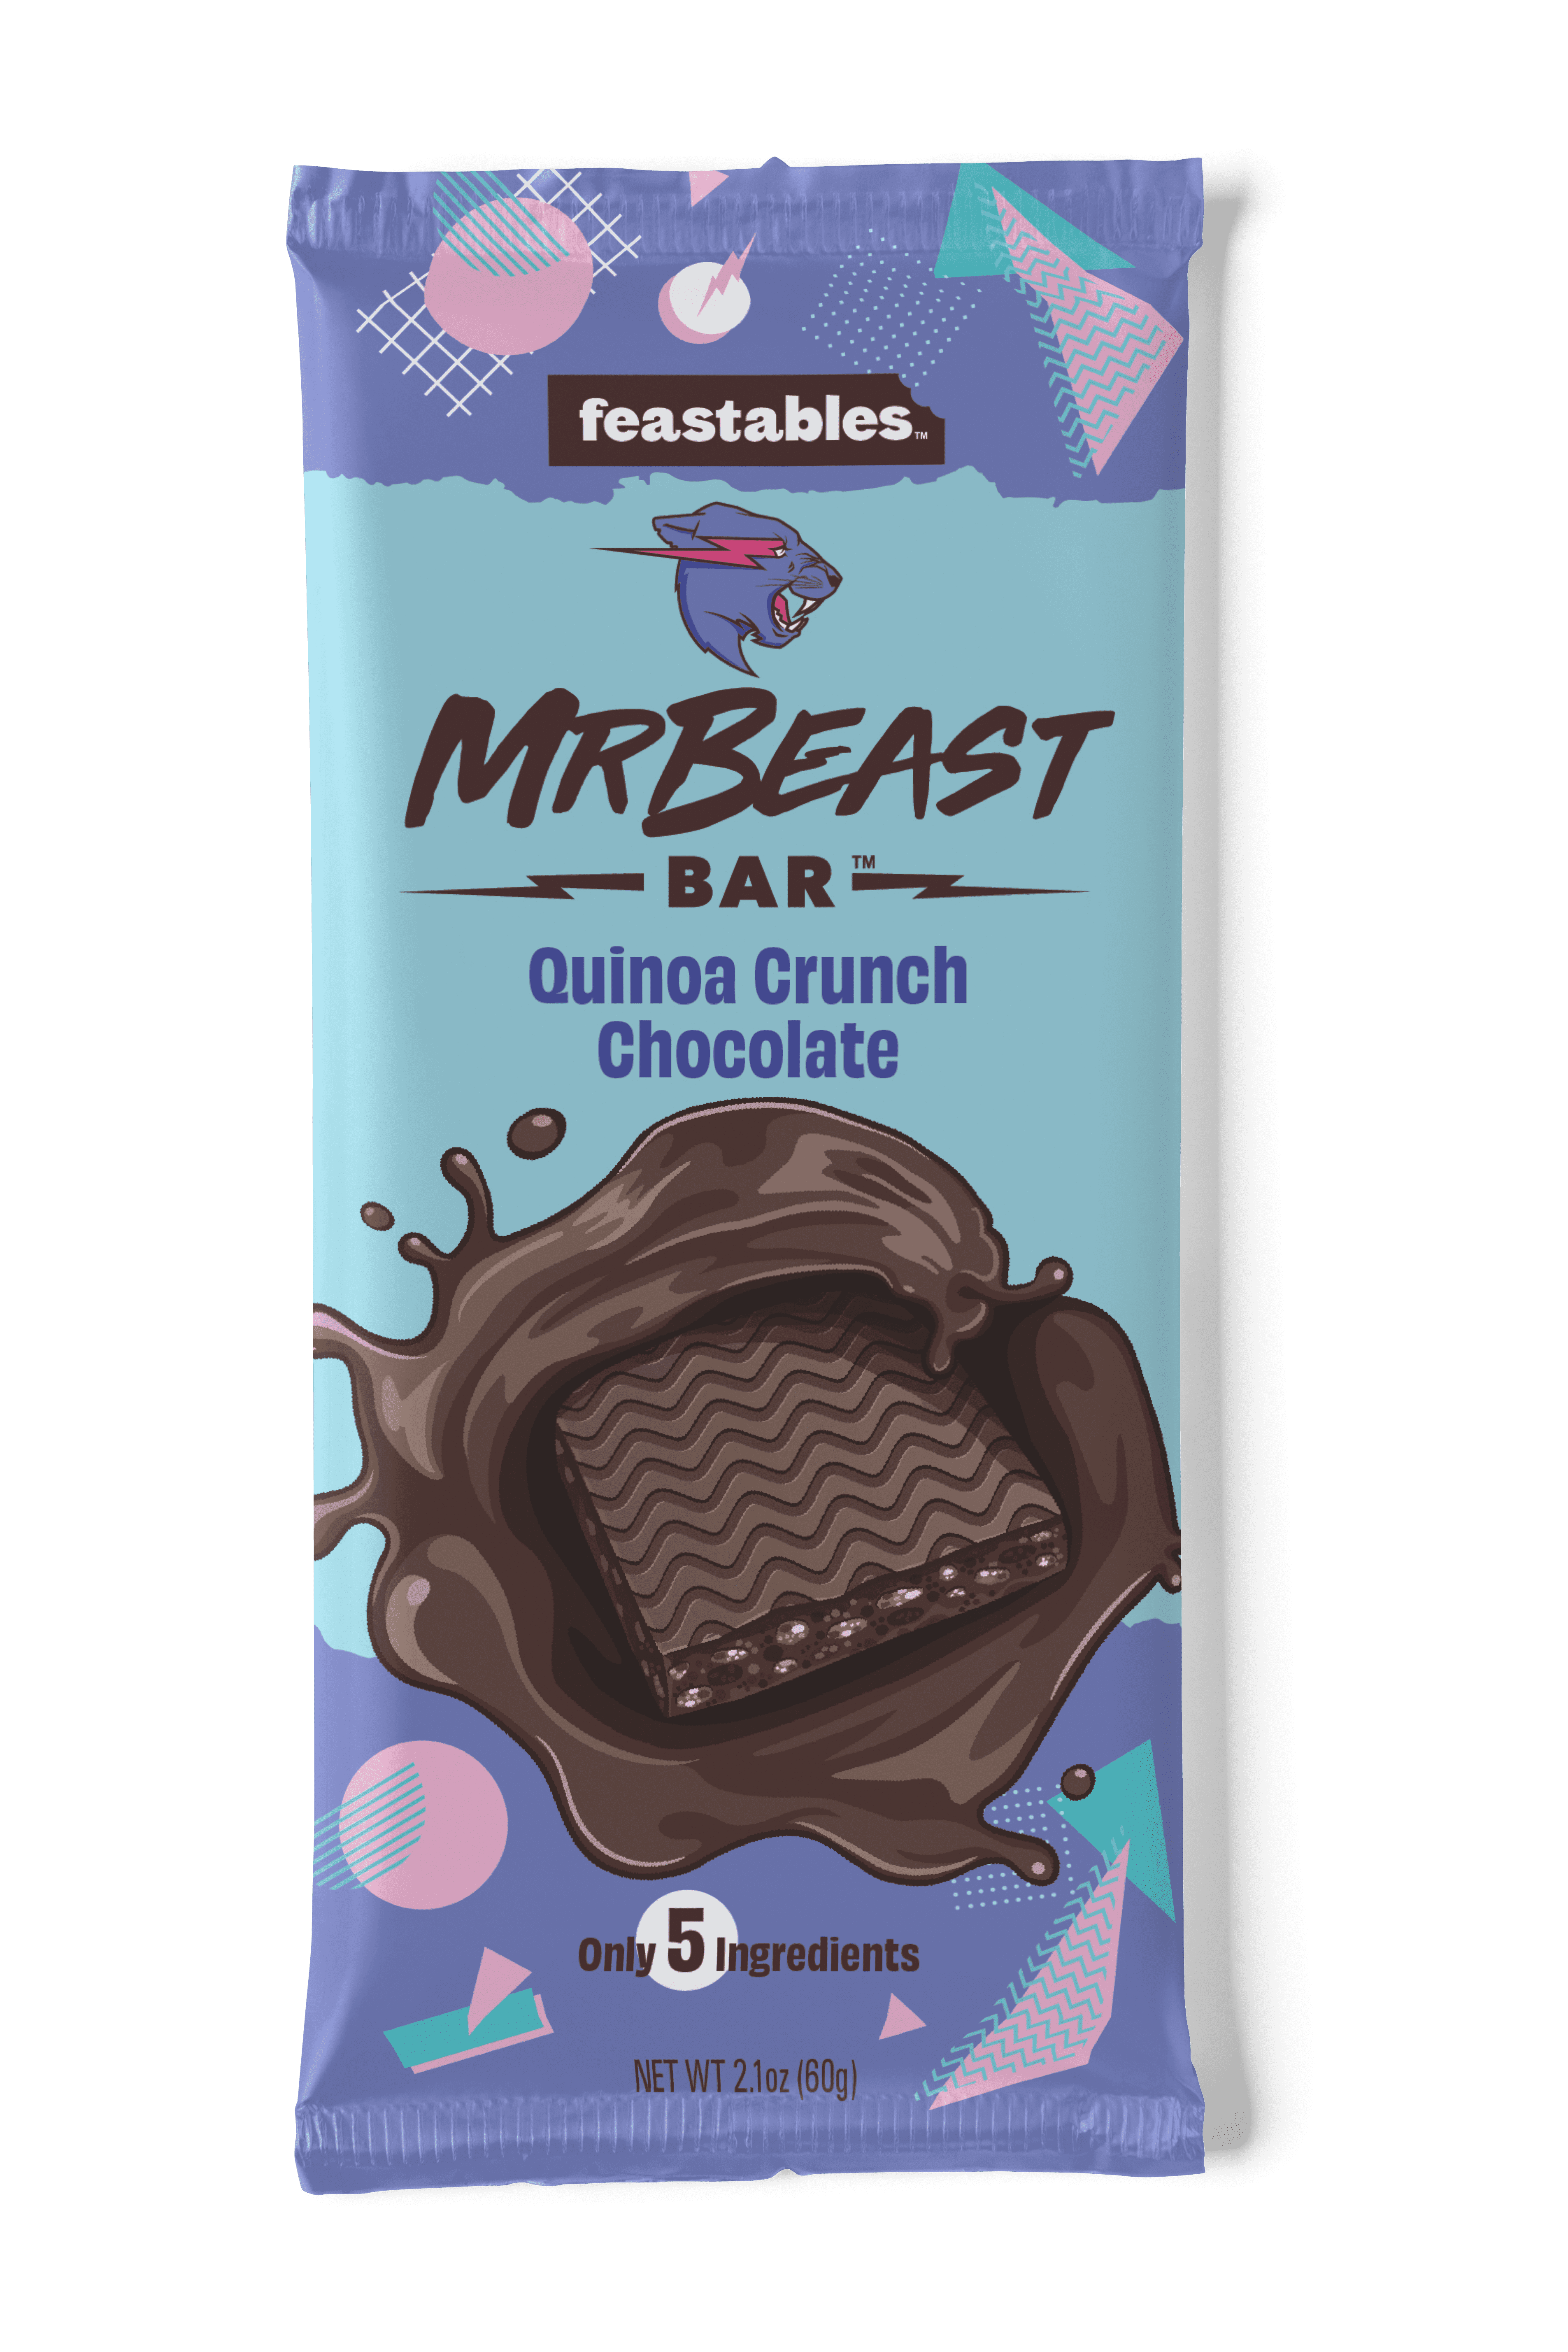 Foodbeast - This dark chocolate bar is made with a $2,000